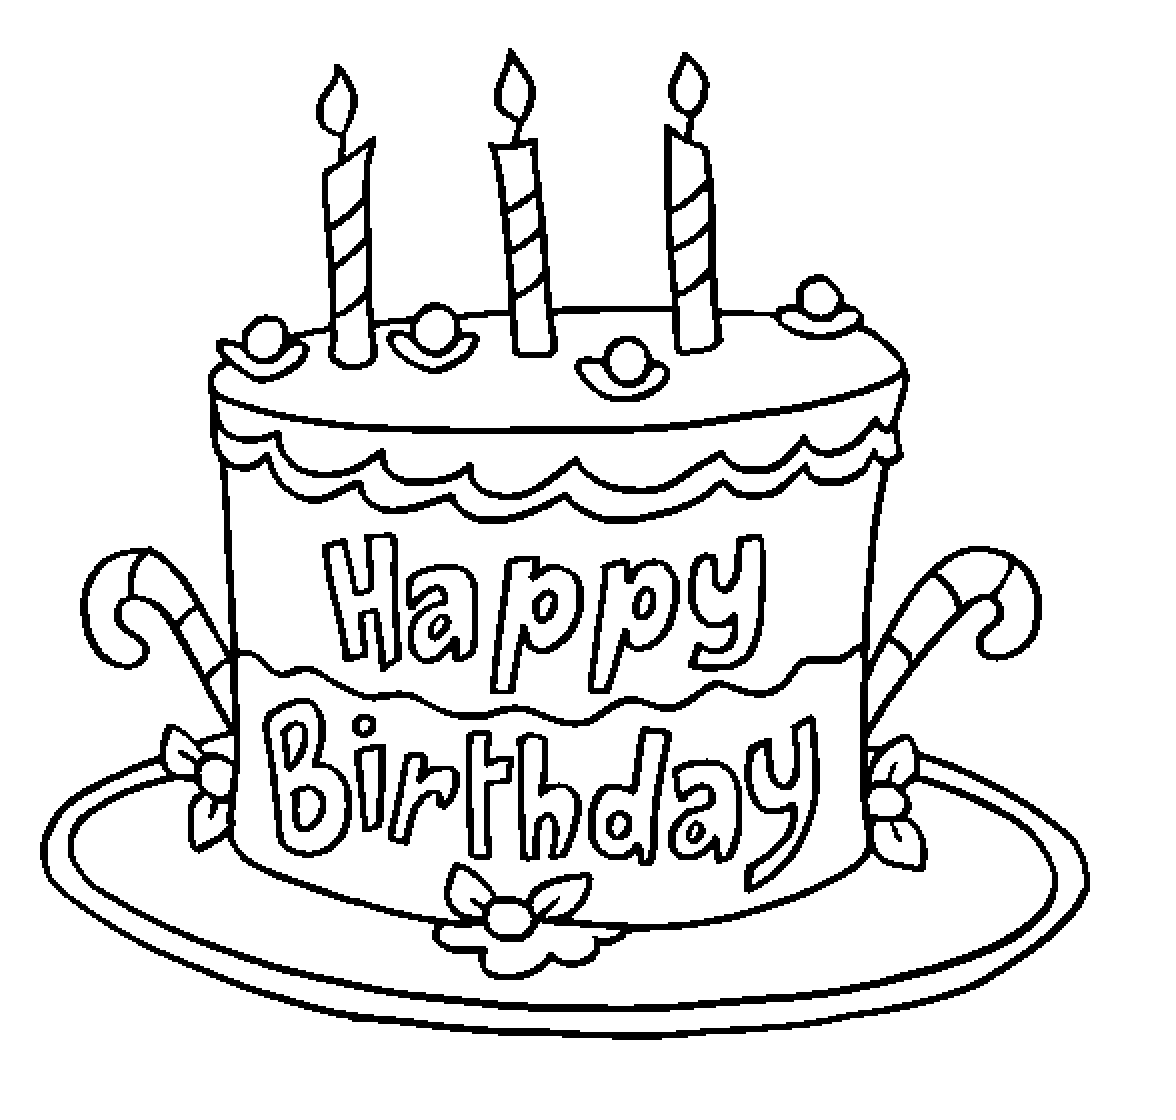 coloring page of a birthday cake free printable birthday cake coloring pages for kids birthday page a coloring cake of 